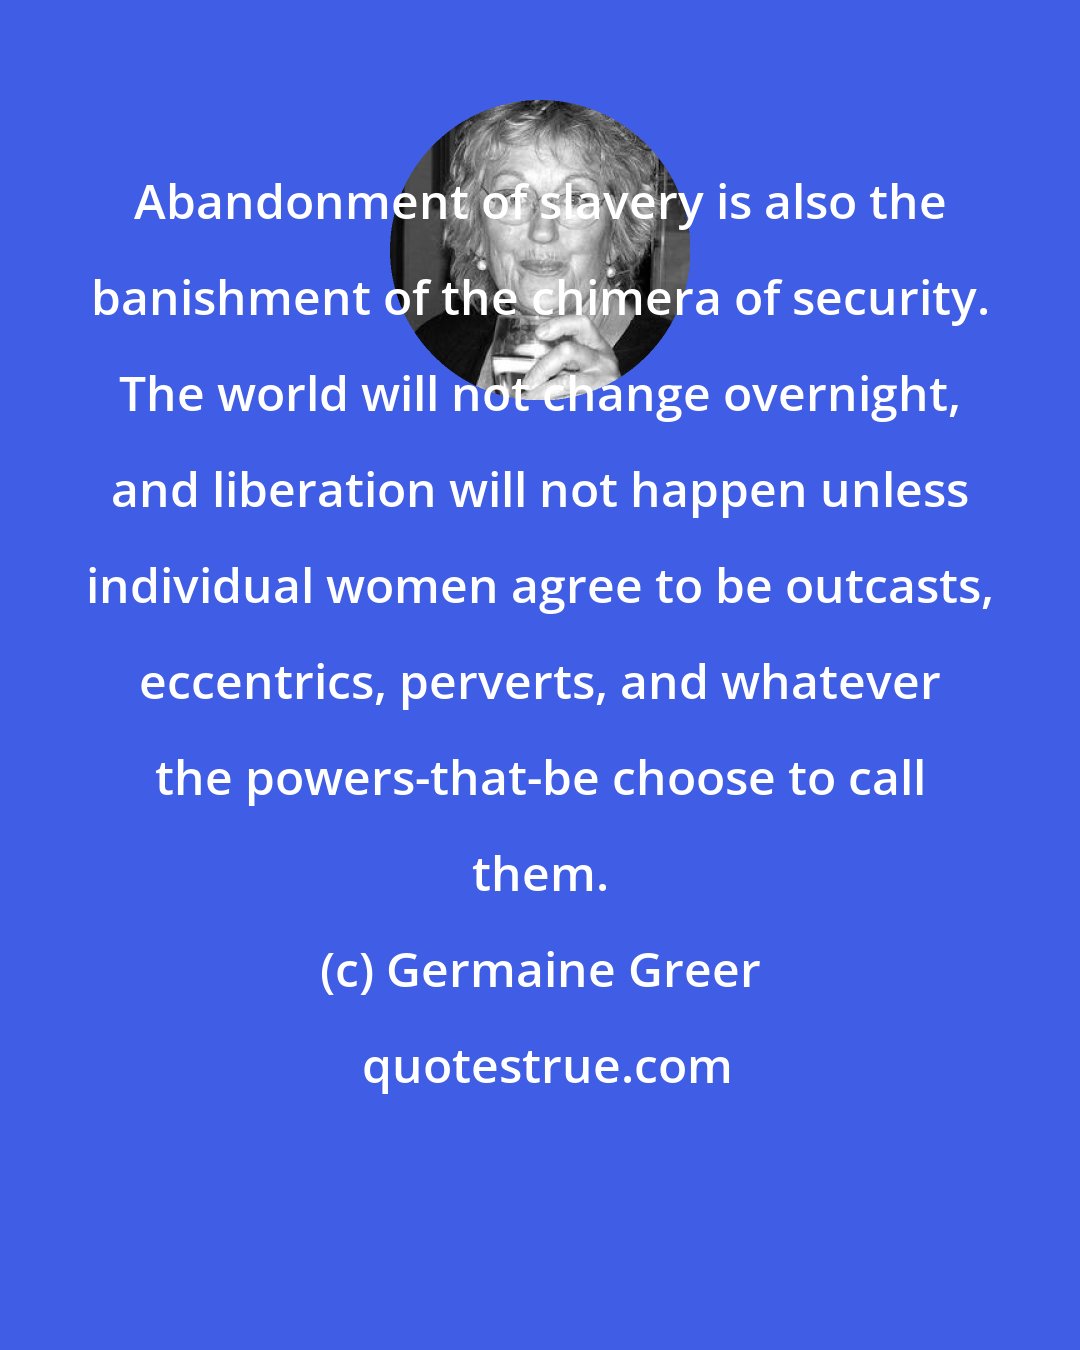 Germaine Greer: Abandonment of slavery is also the banishment of the chimera of security. The world will not change overnight, and liberation will not happen unless individual women agree to be outcasts, eccentrics, perverts, and whatever the powers-that-be choose to call them.